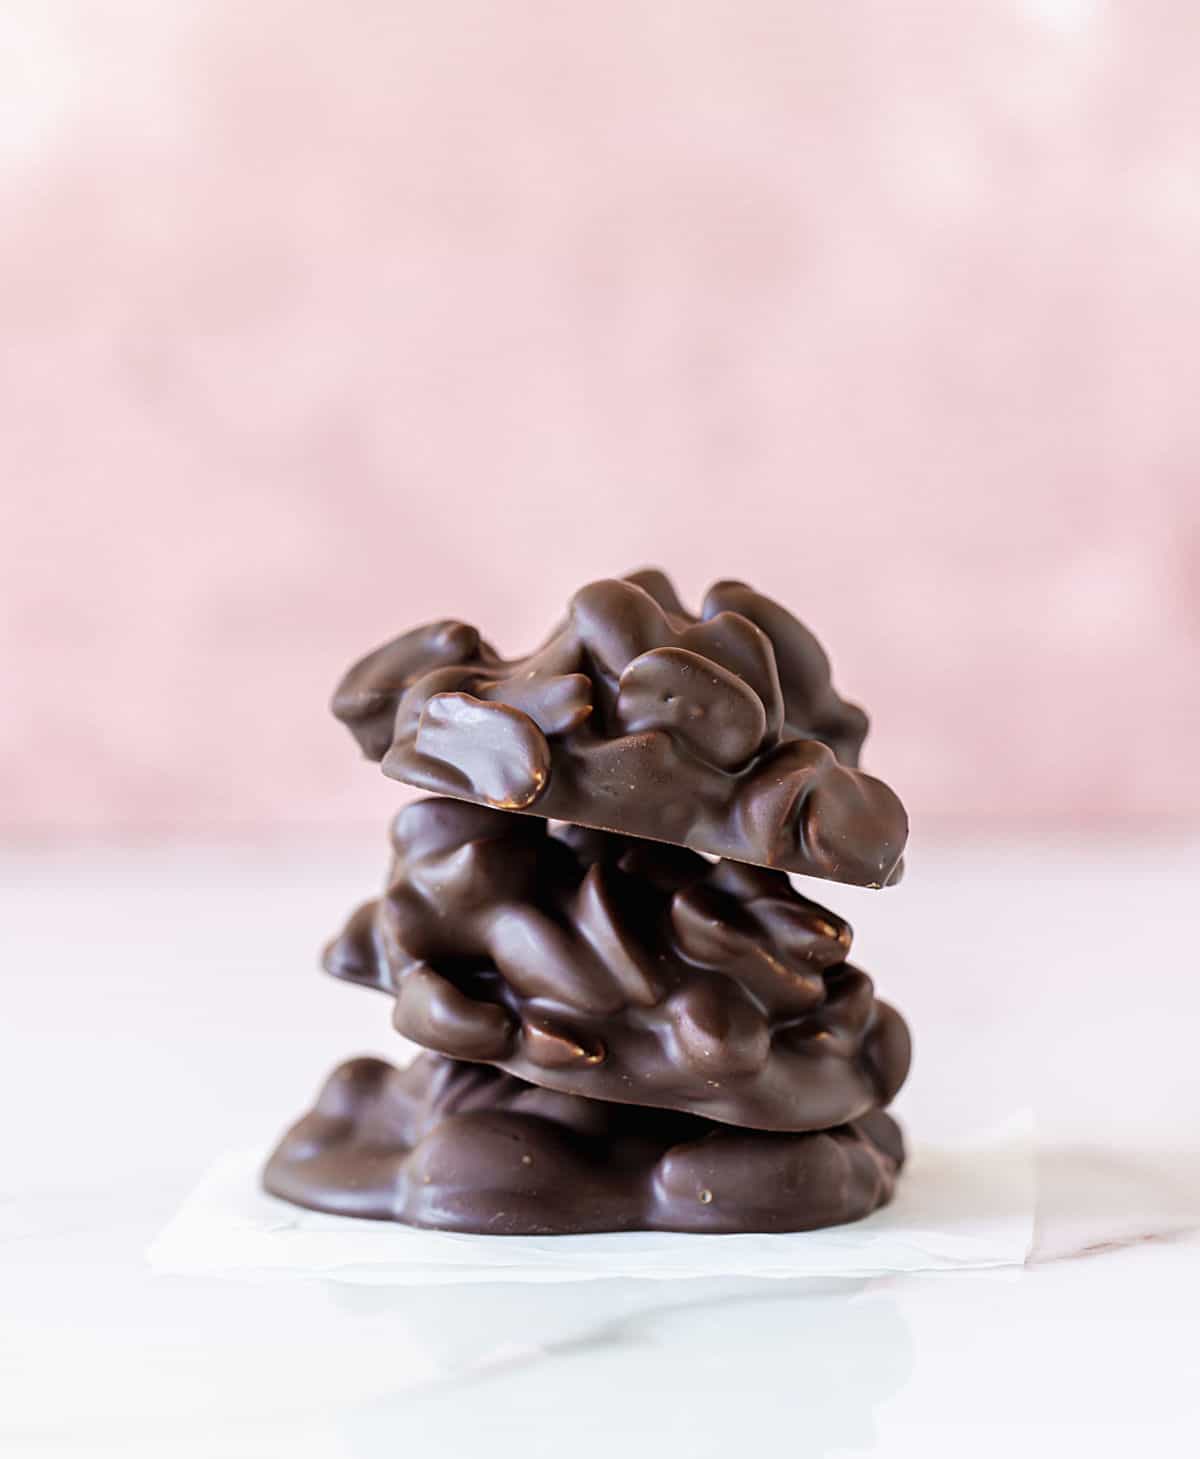 Stack of three chocolate peanut clusters on white and pink background.